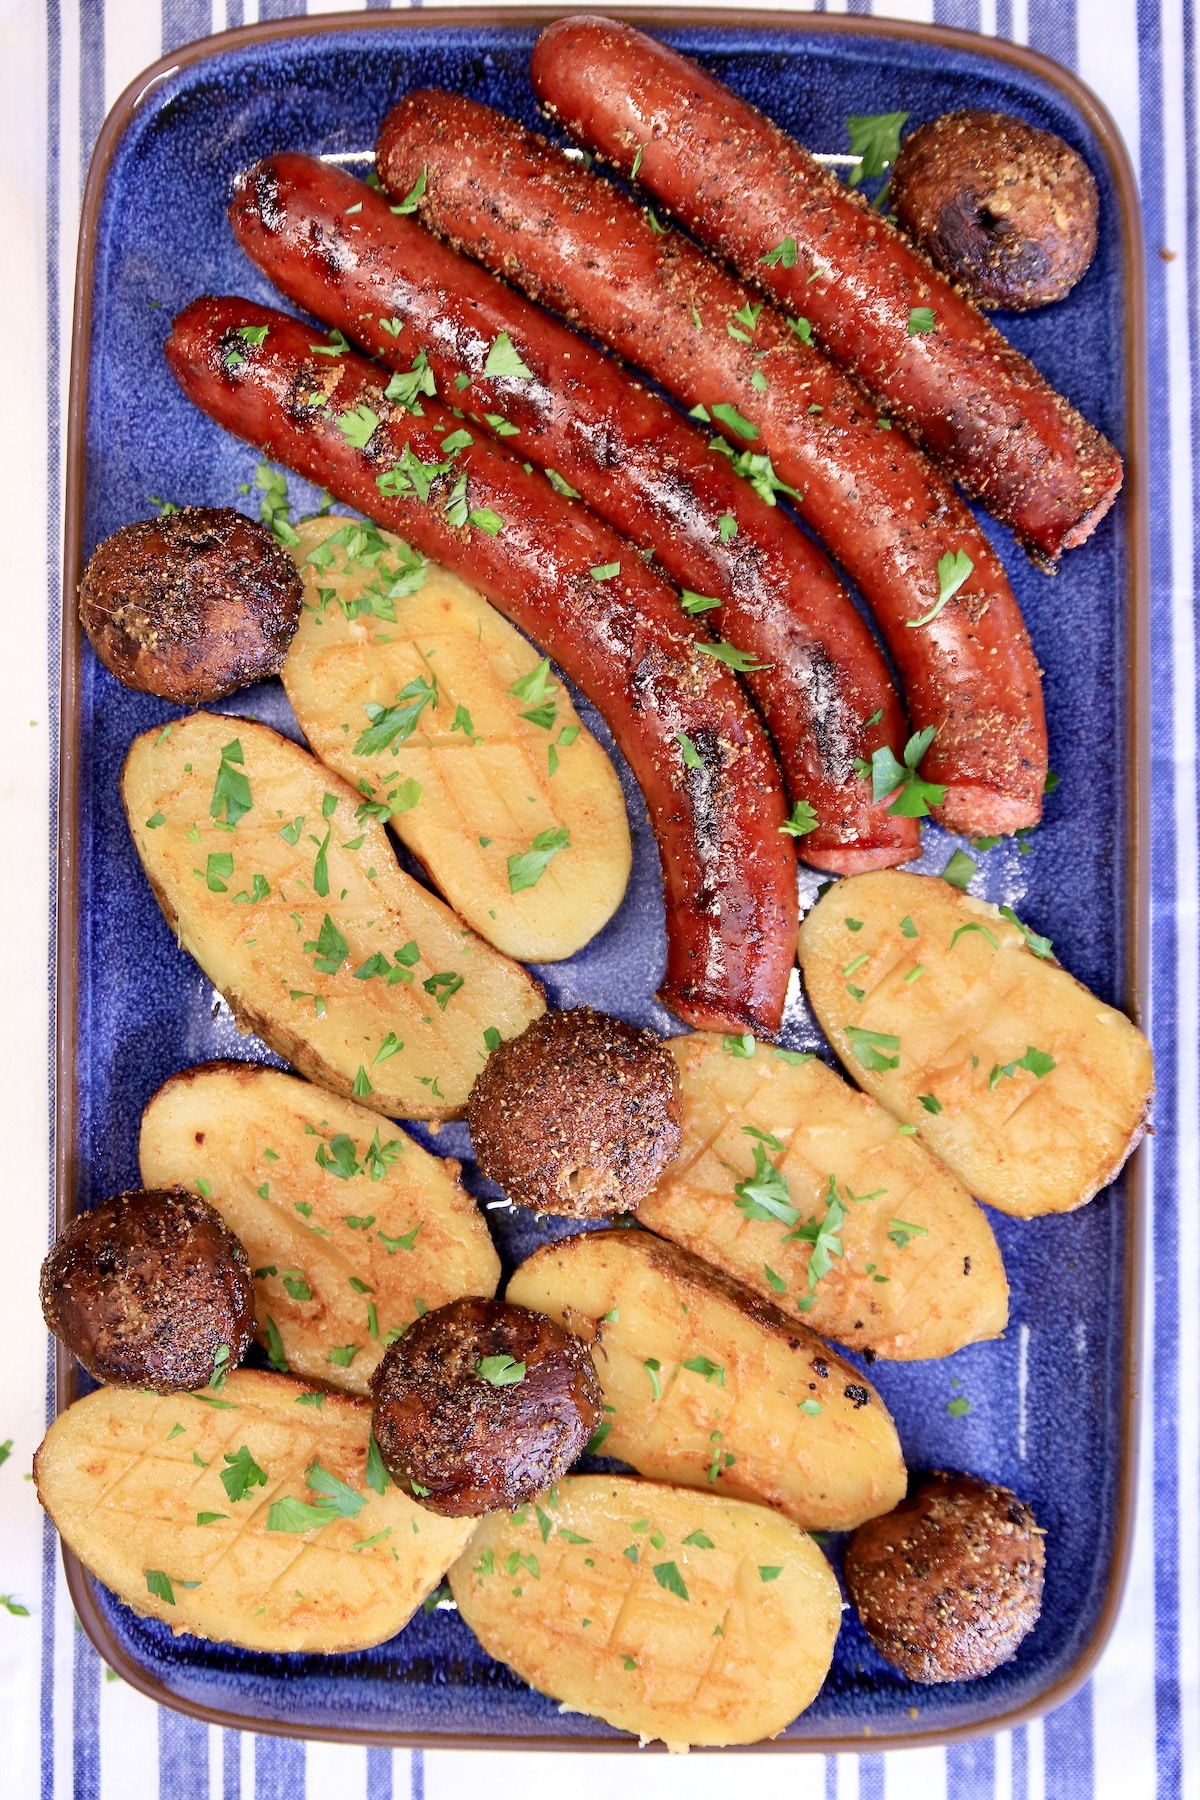 Grilled smoked sausage, potatoes, mushrooms on a platter.